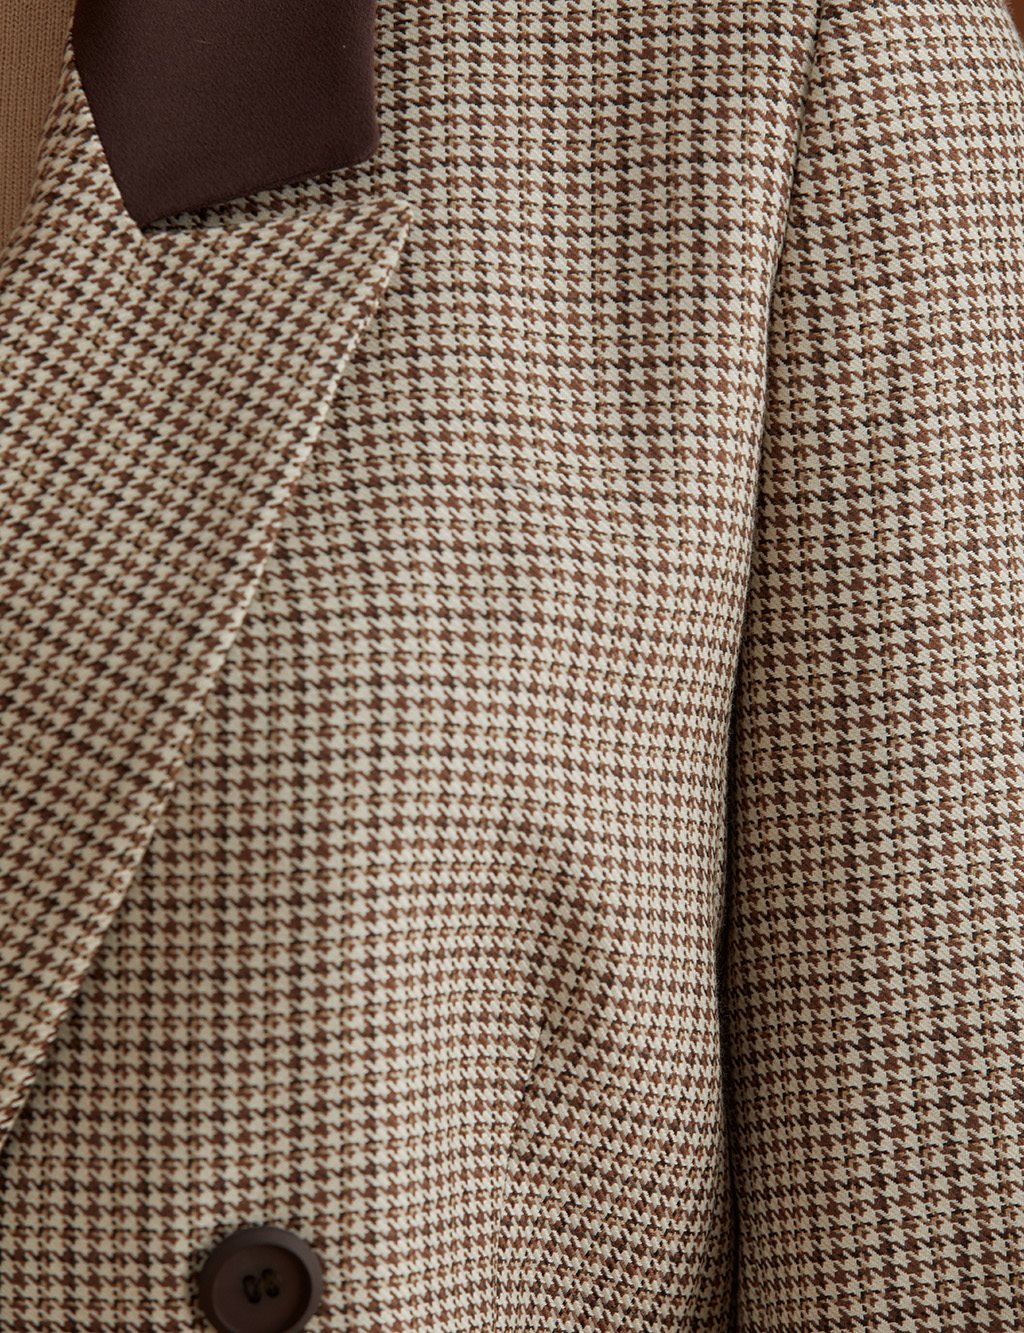 Houndstooth Patterned Double Breasted Jacket Brown-Cream